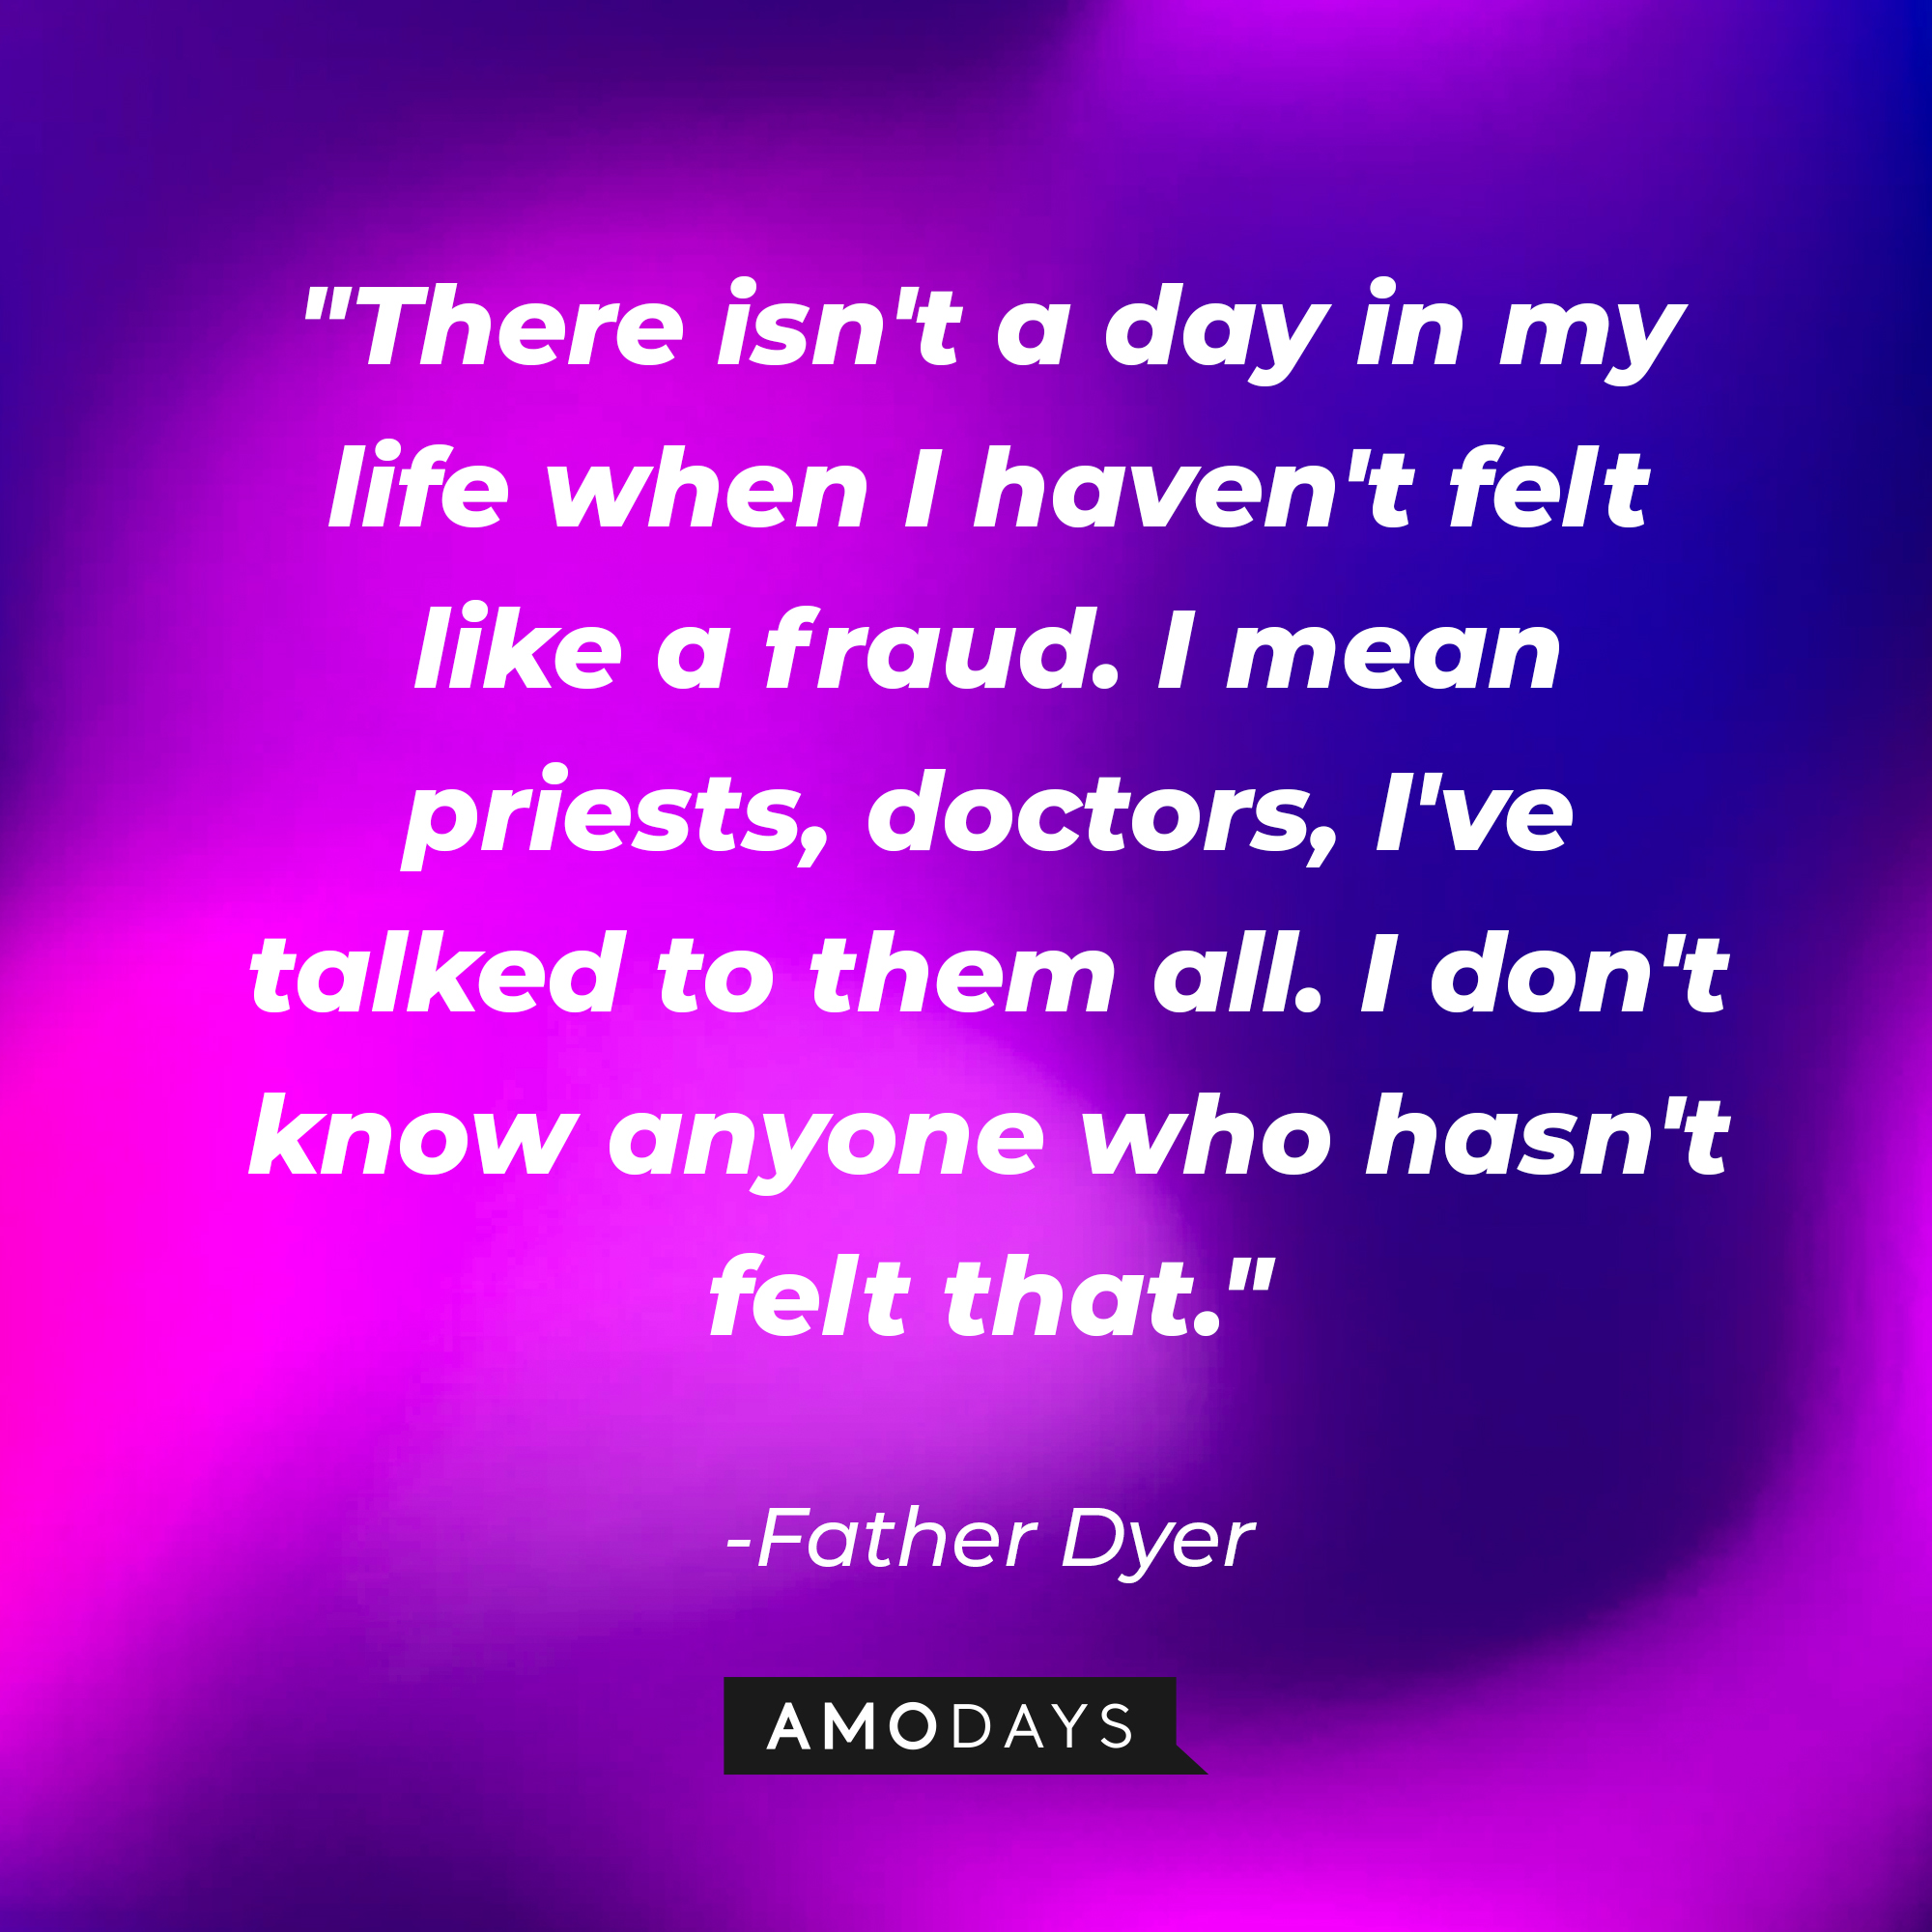 Fathe Karras' quote: "There isn't a day in my life when I haven't felt like a fraud. I mean priests, doctors, I've talked to them all. I don't know anyone who hasn't felt that." | Source: AmoDAys